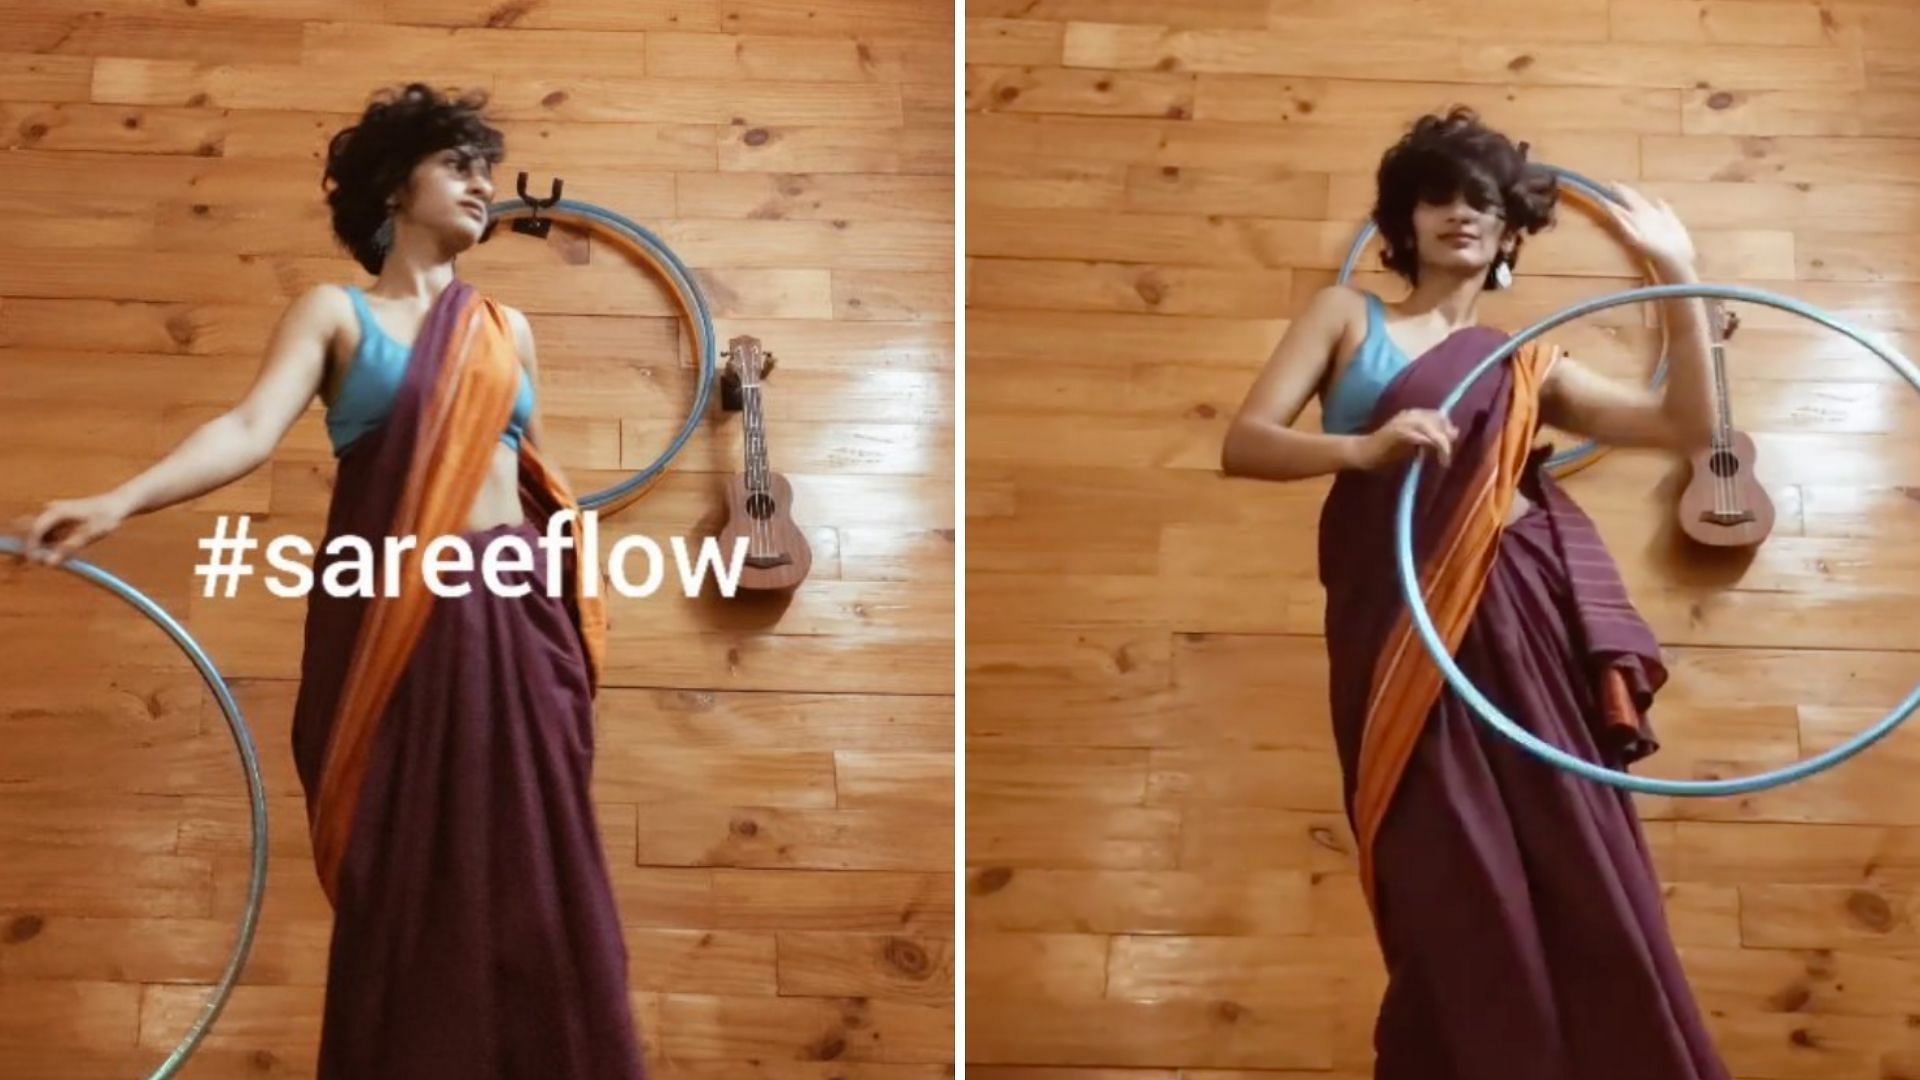 Watch her ace dancing moves in a saree as she hula hoops. 